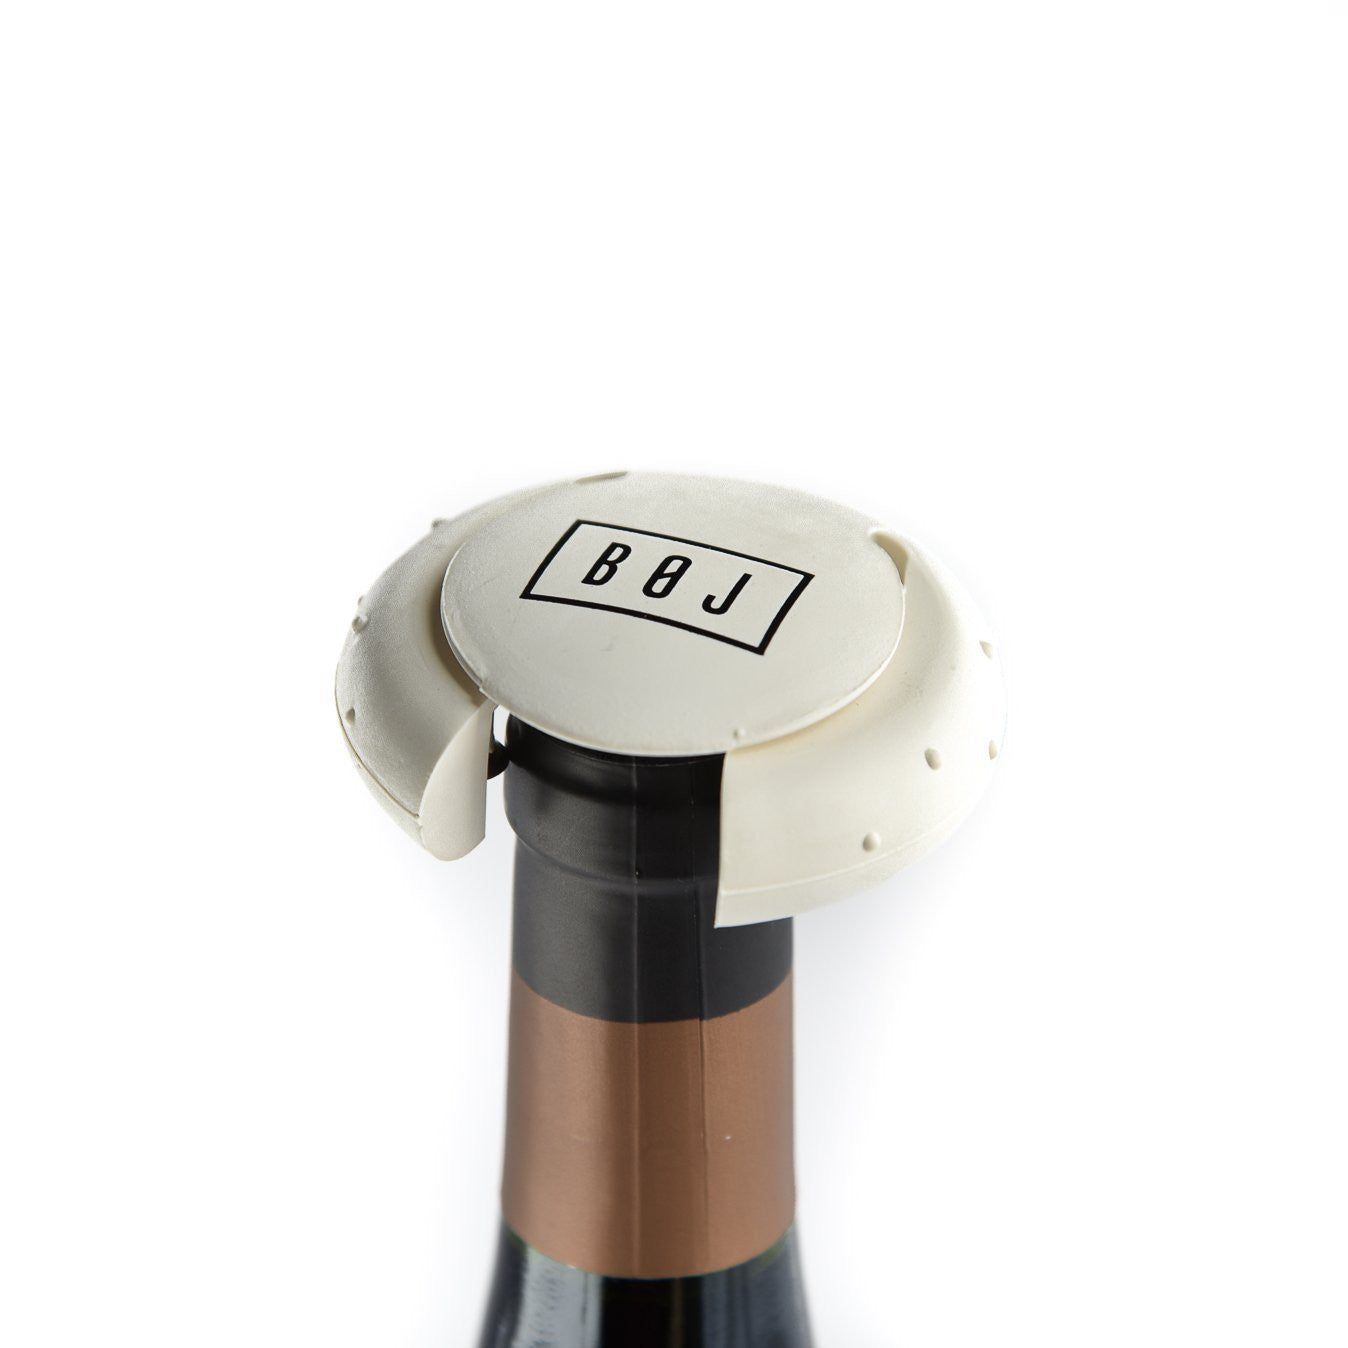 Cap Cut Foil Cutter (White) with Holder Made of Natural Cork Packaging - wineopeners.shop